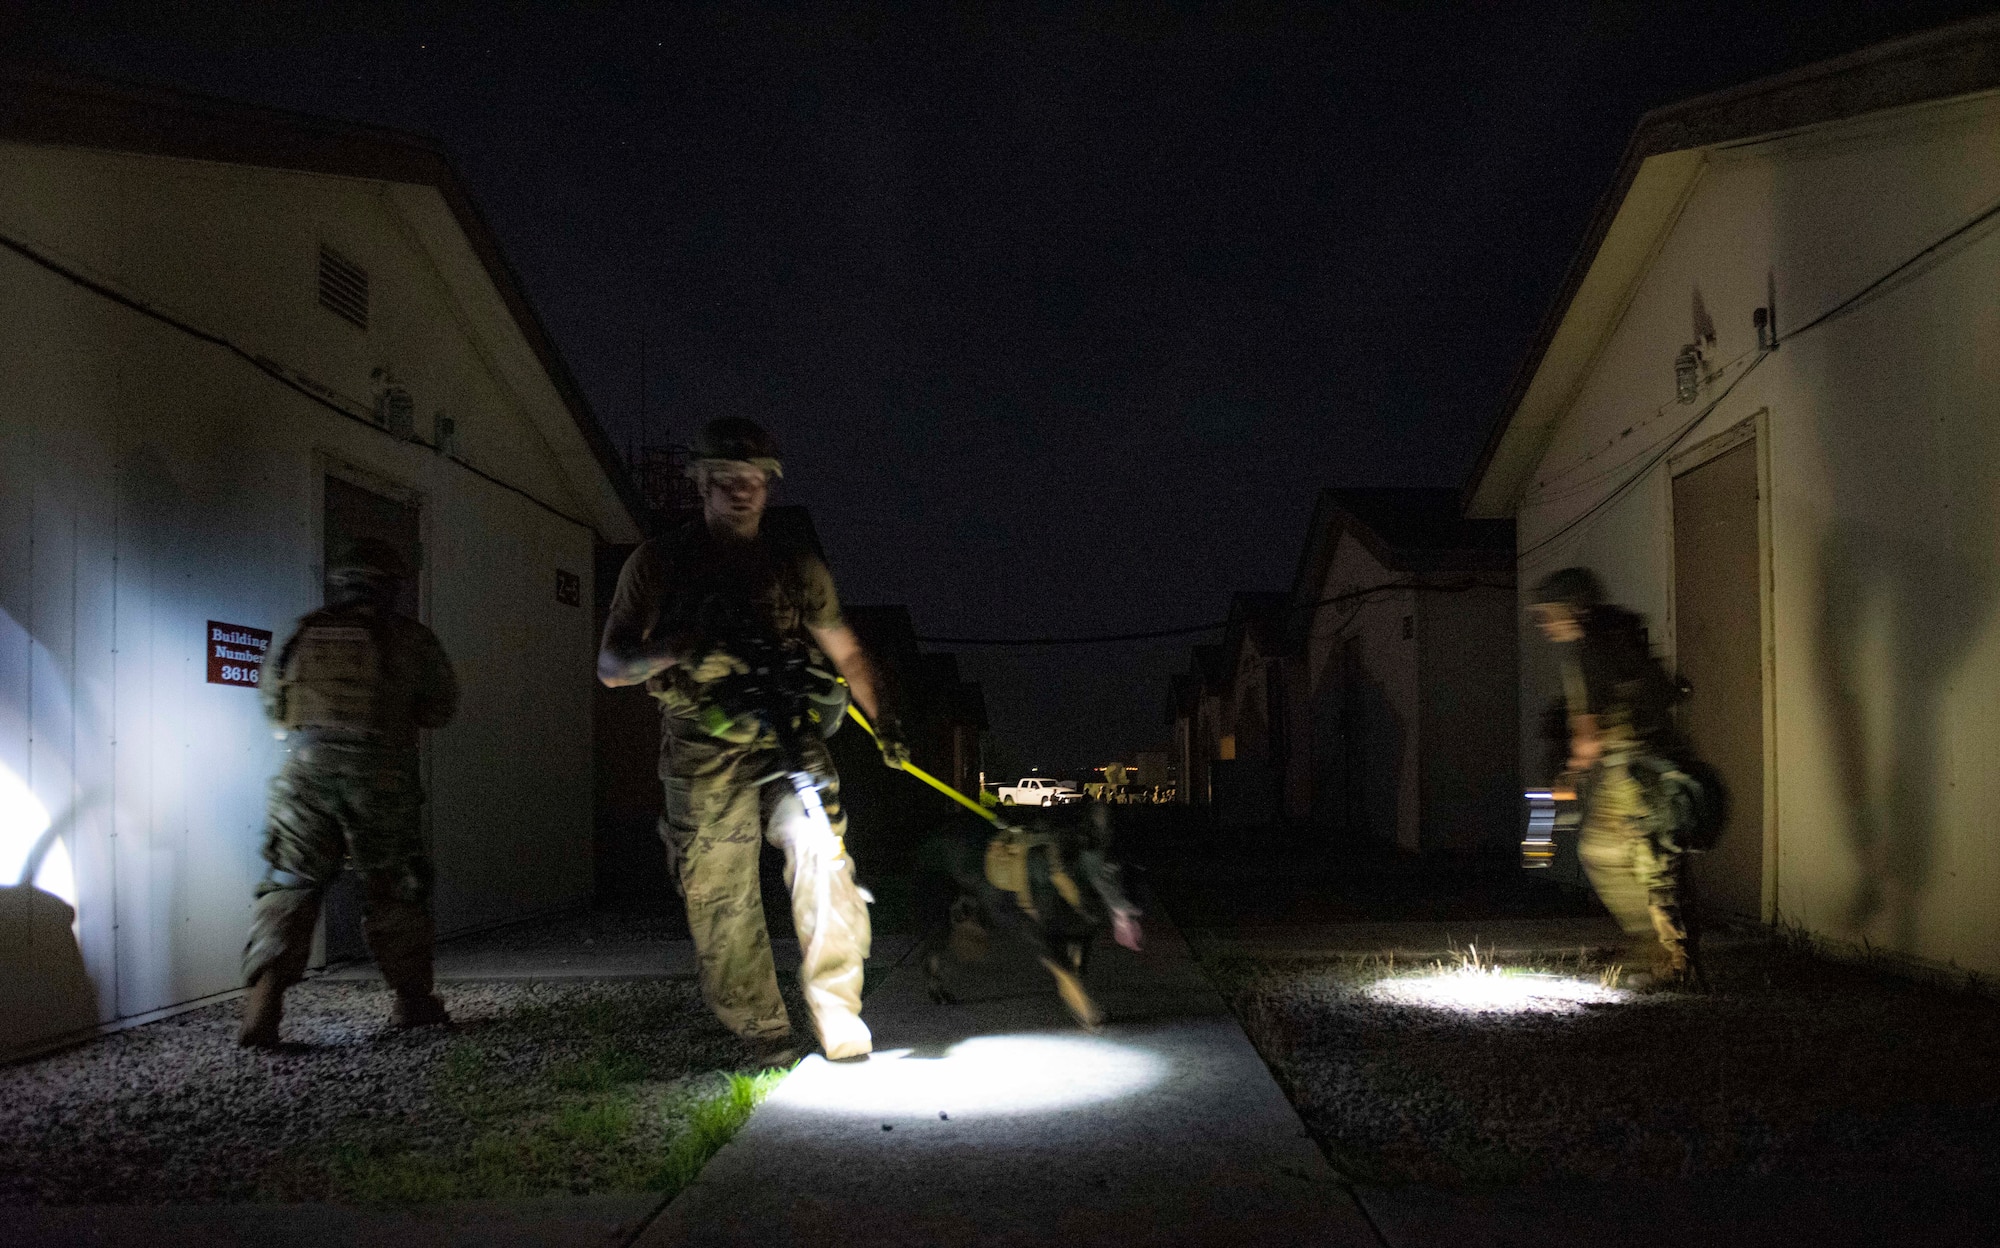 8th Security Forces Squadron Airmen participate in a routine training scenario at Kunsan Air Base, Republic of Korea, July 26, 2021. Members of the 8th SFS broke into teams and cleared buildings on Kunsan AB with the objective of locating and apprehending a criminal role player. These trainings enhance the lethality and readiness of the 8th SFS. (U.S. Air Force photo by Staff Sgt. Gabrielle Spalding)